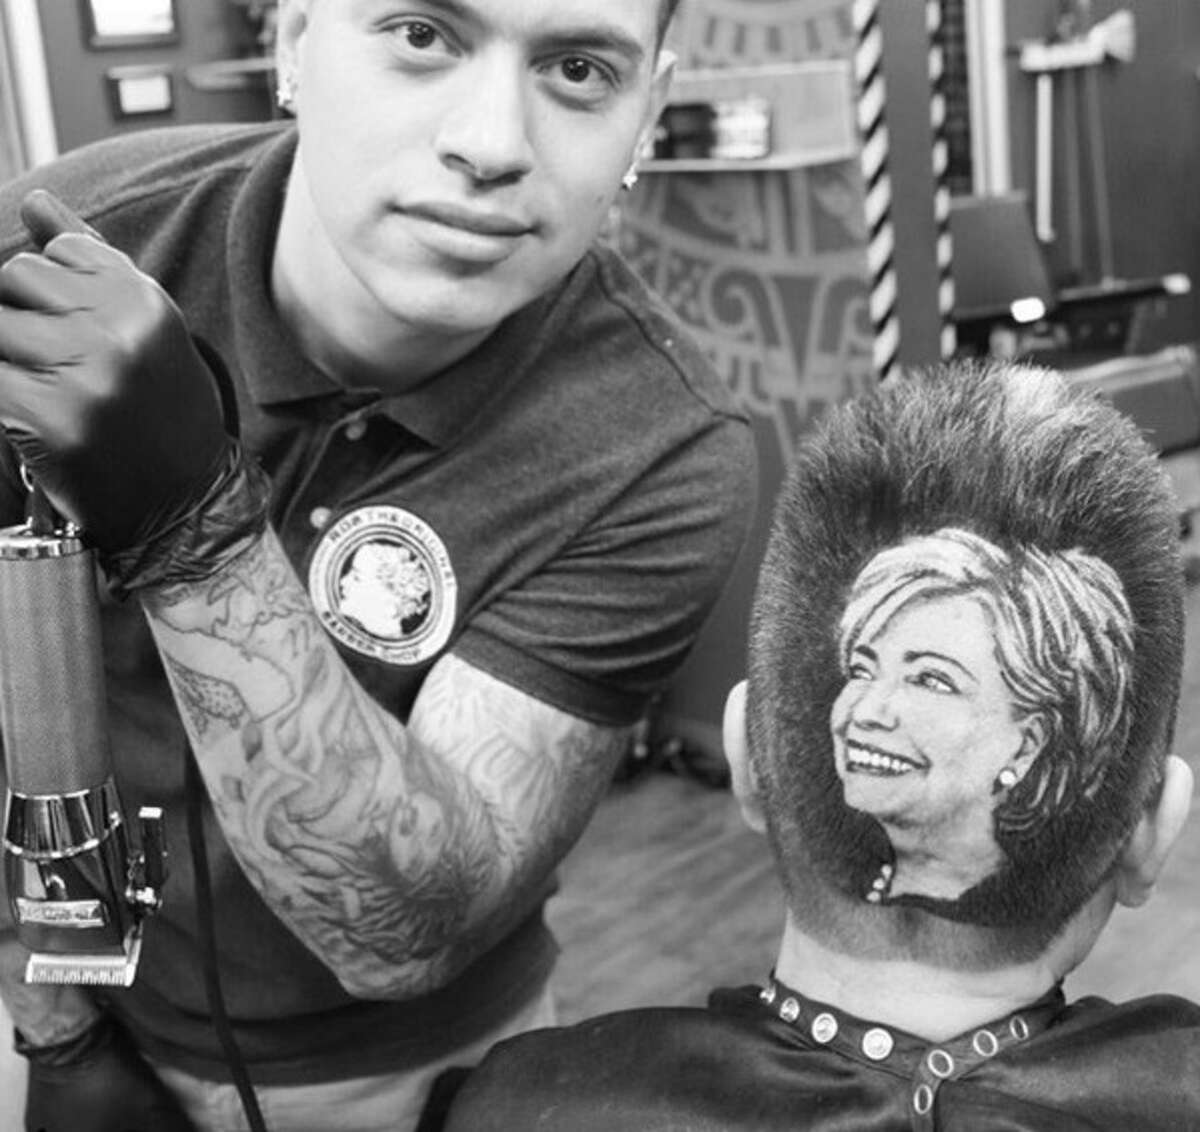 Rob the Original, a barber in San Antonio, poses next to his Hillary Clinton on October 14, 2015.